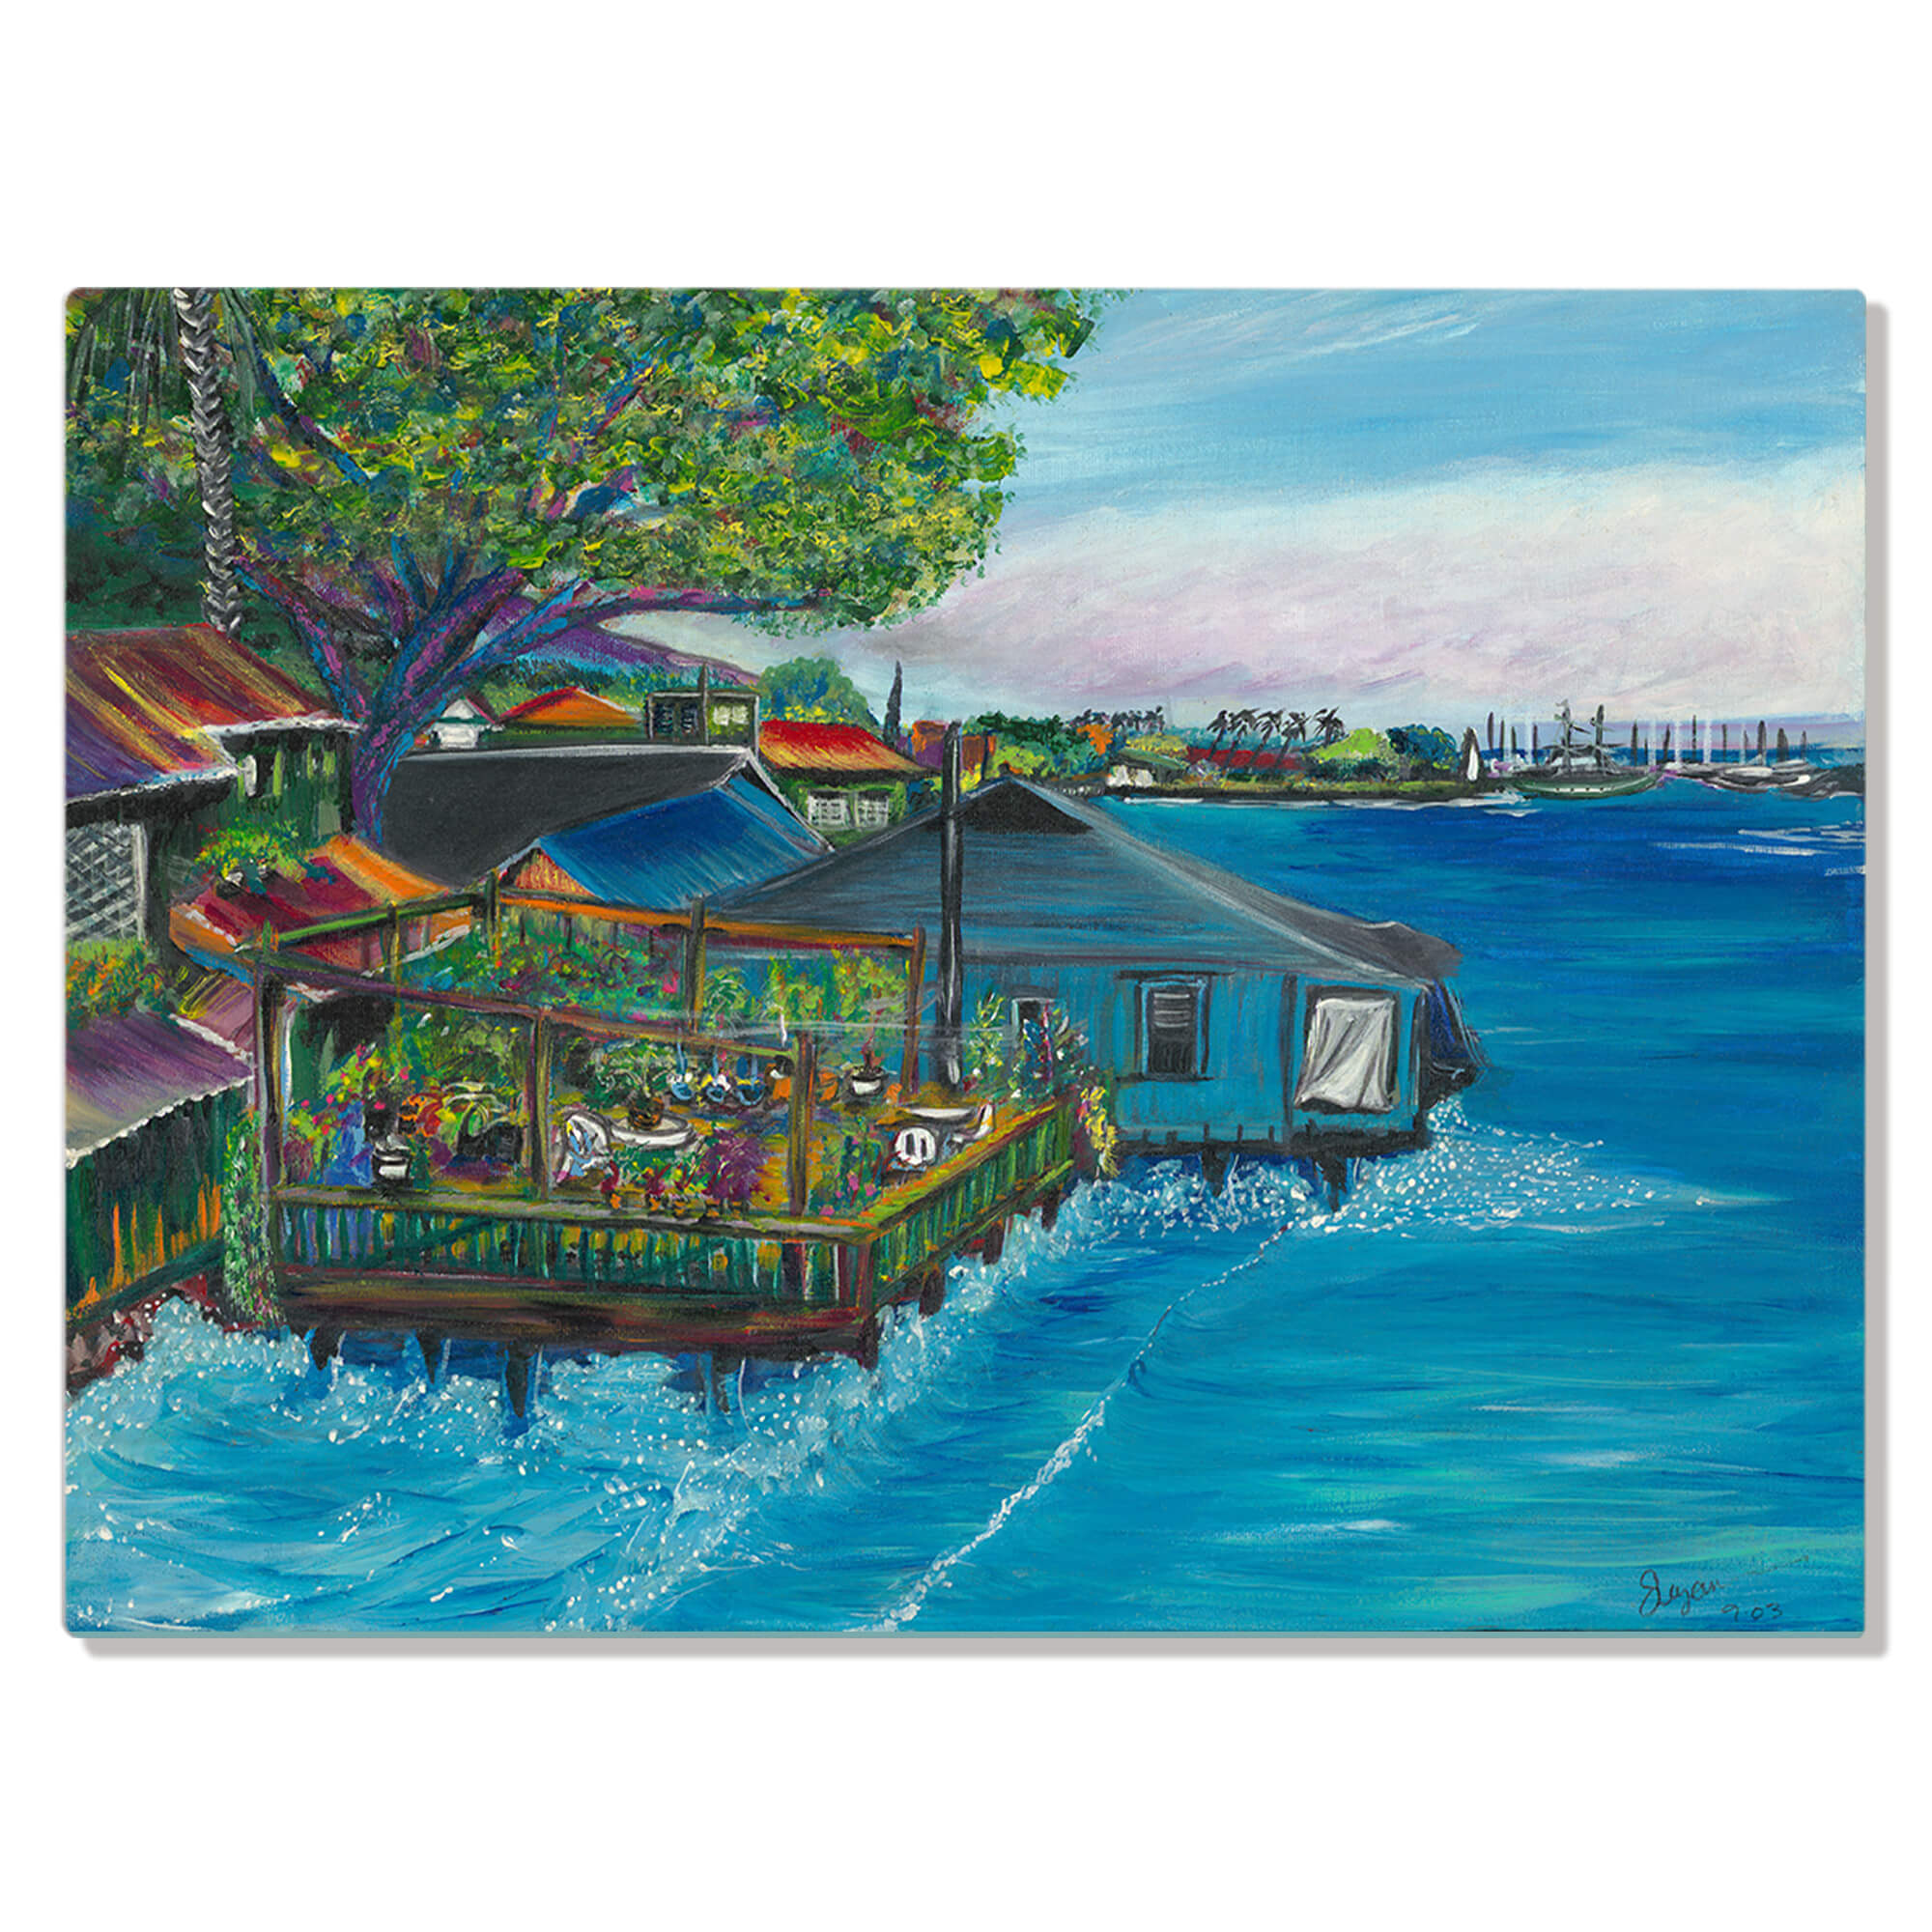 Metal art print featuring a house on top of the water    by  hawaii artist Suzanne MacAdam 